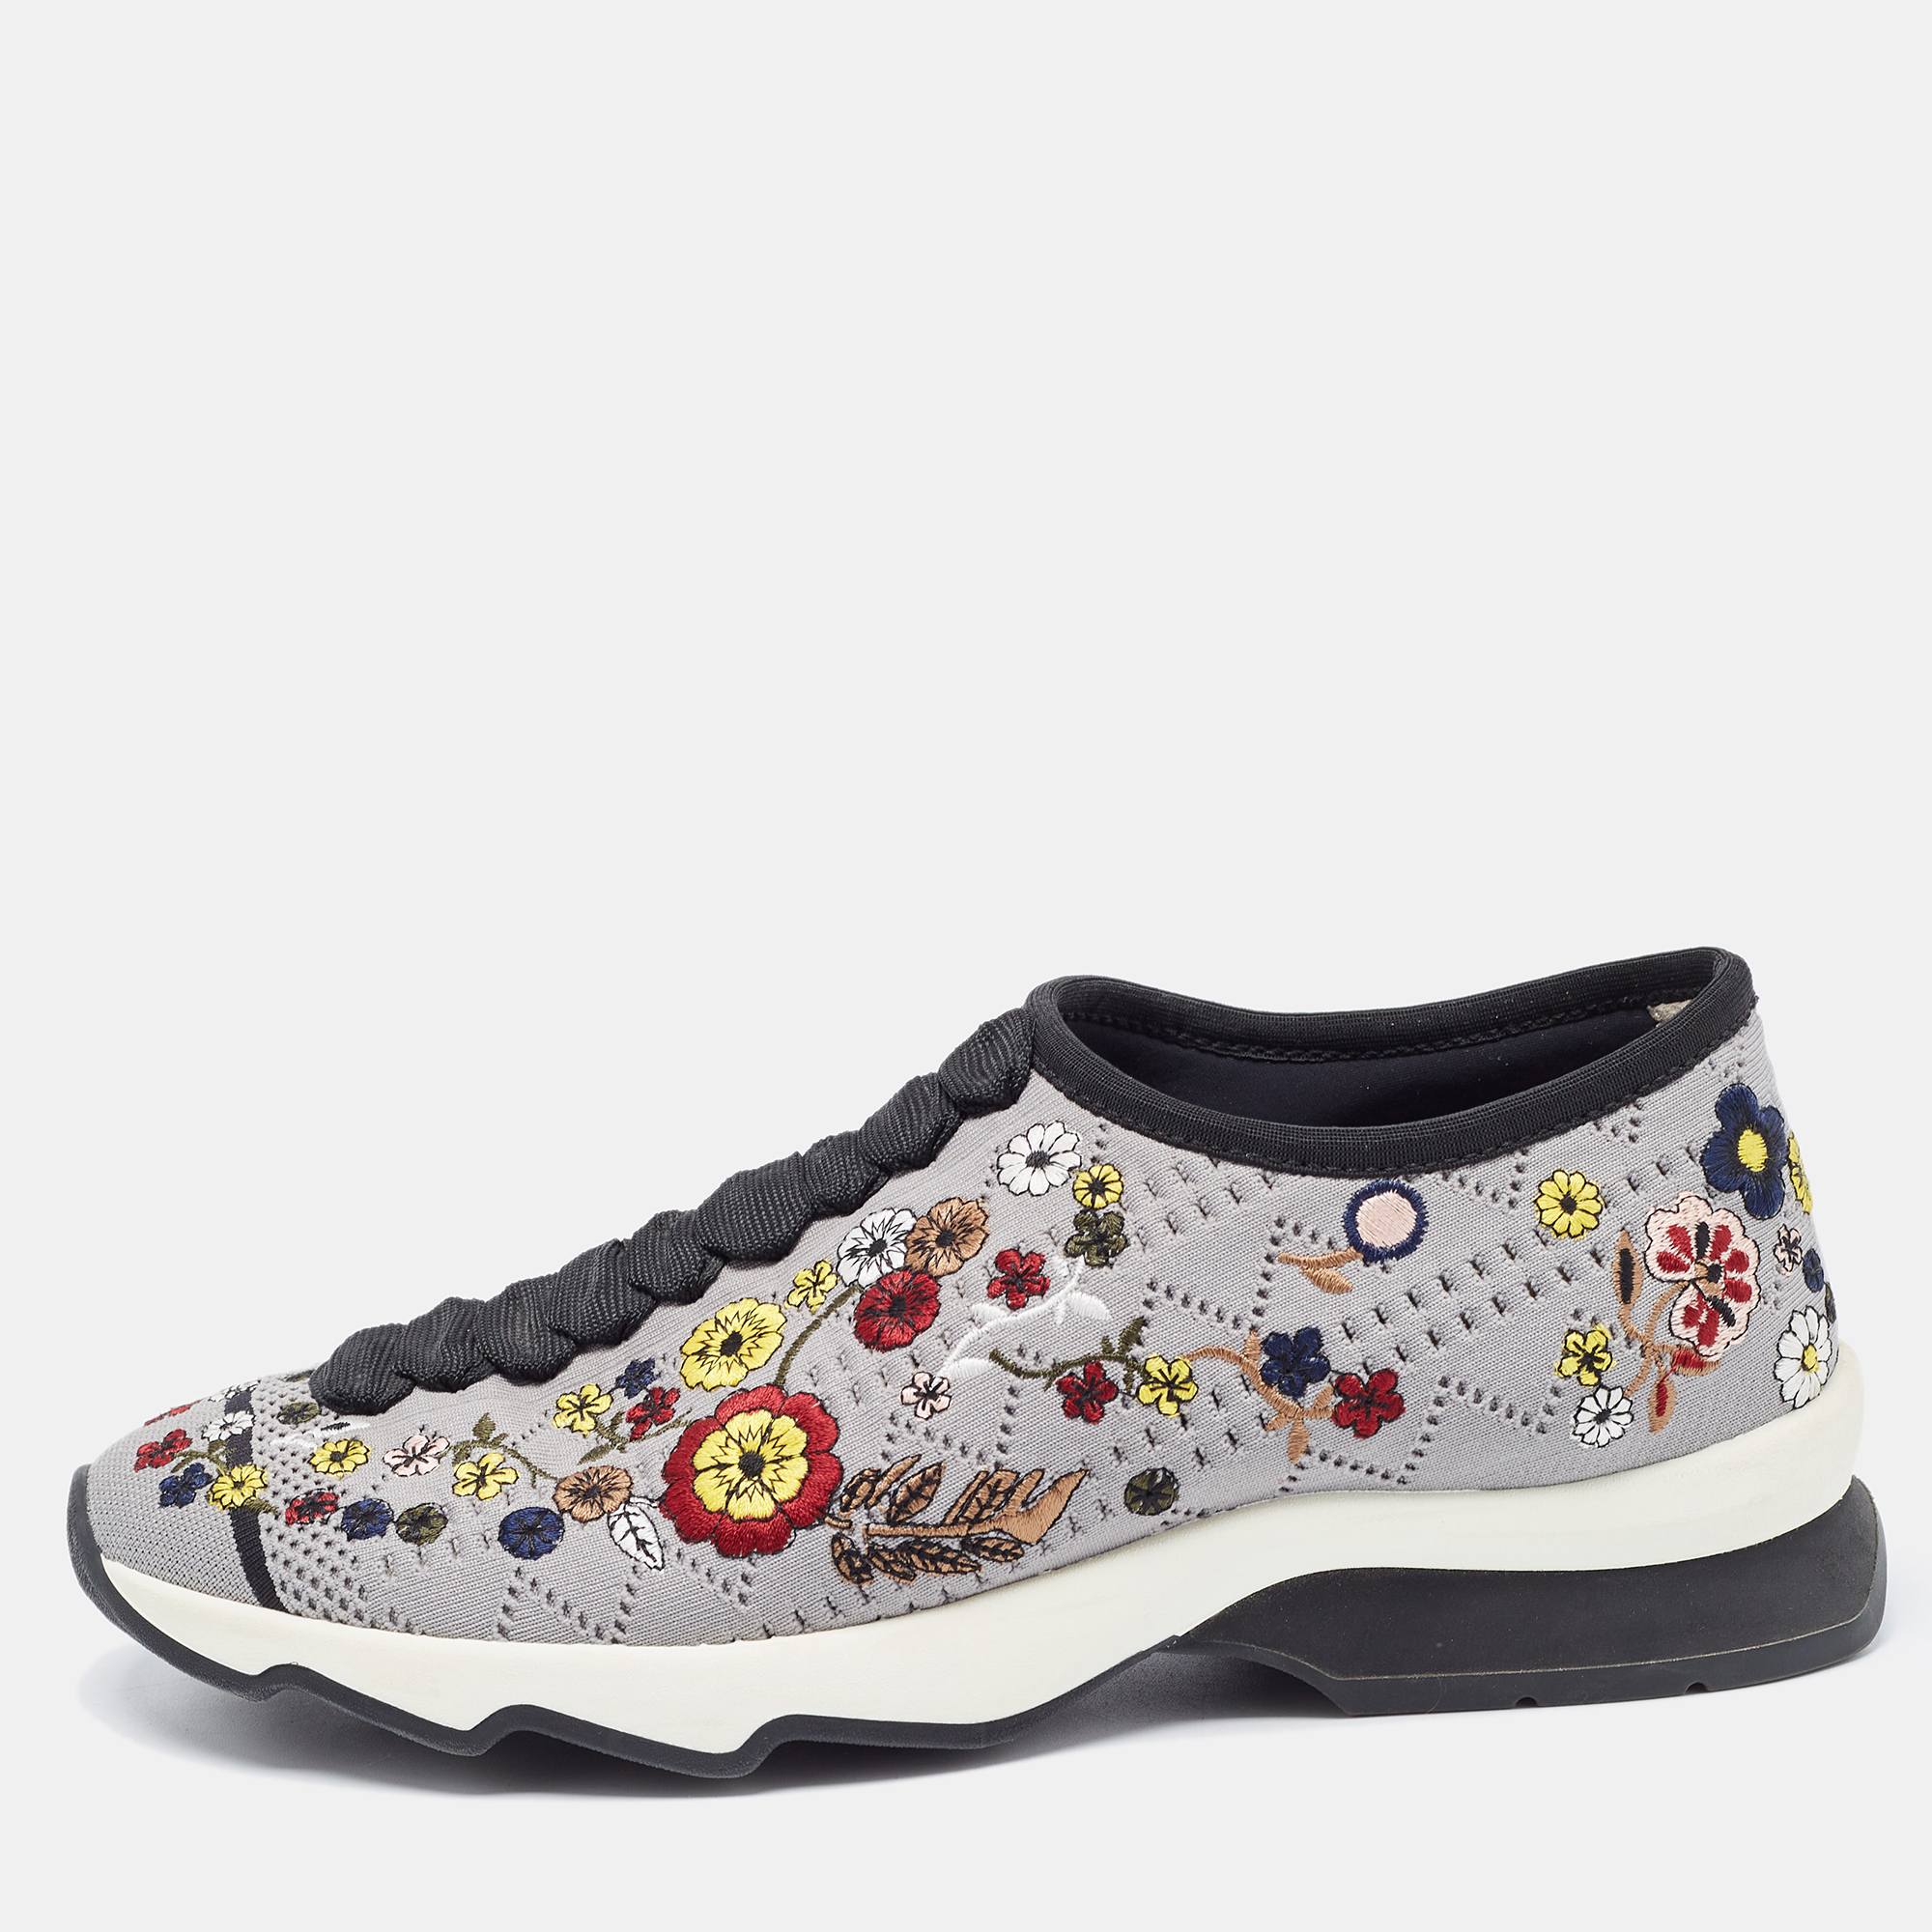 Fendi Grey Floral Embroidered Knit Fabric Slip On Sneakers Size 38